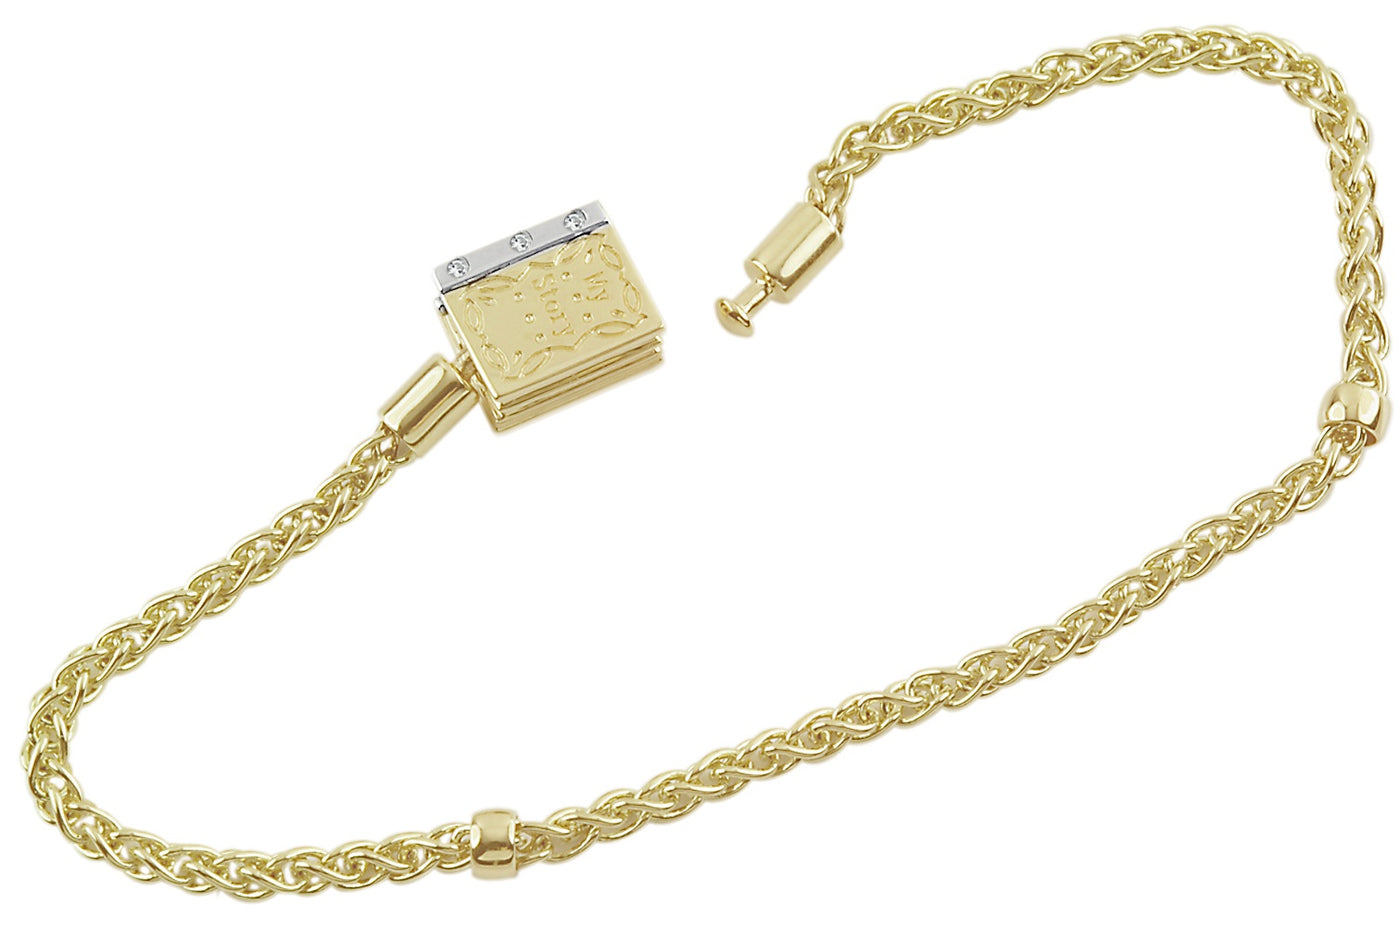 7.25" Bracelet YG - 14K Yellow Gold with Stopper Beads and Storywheel Book Clasp with Diamonds